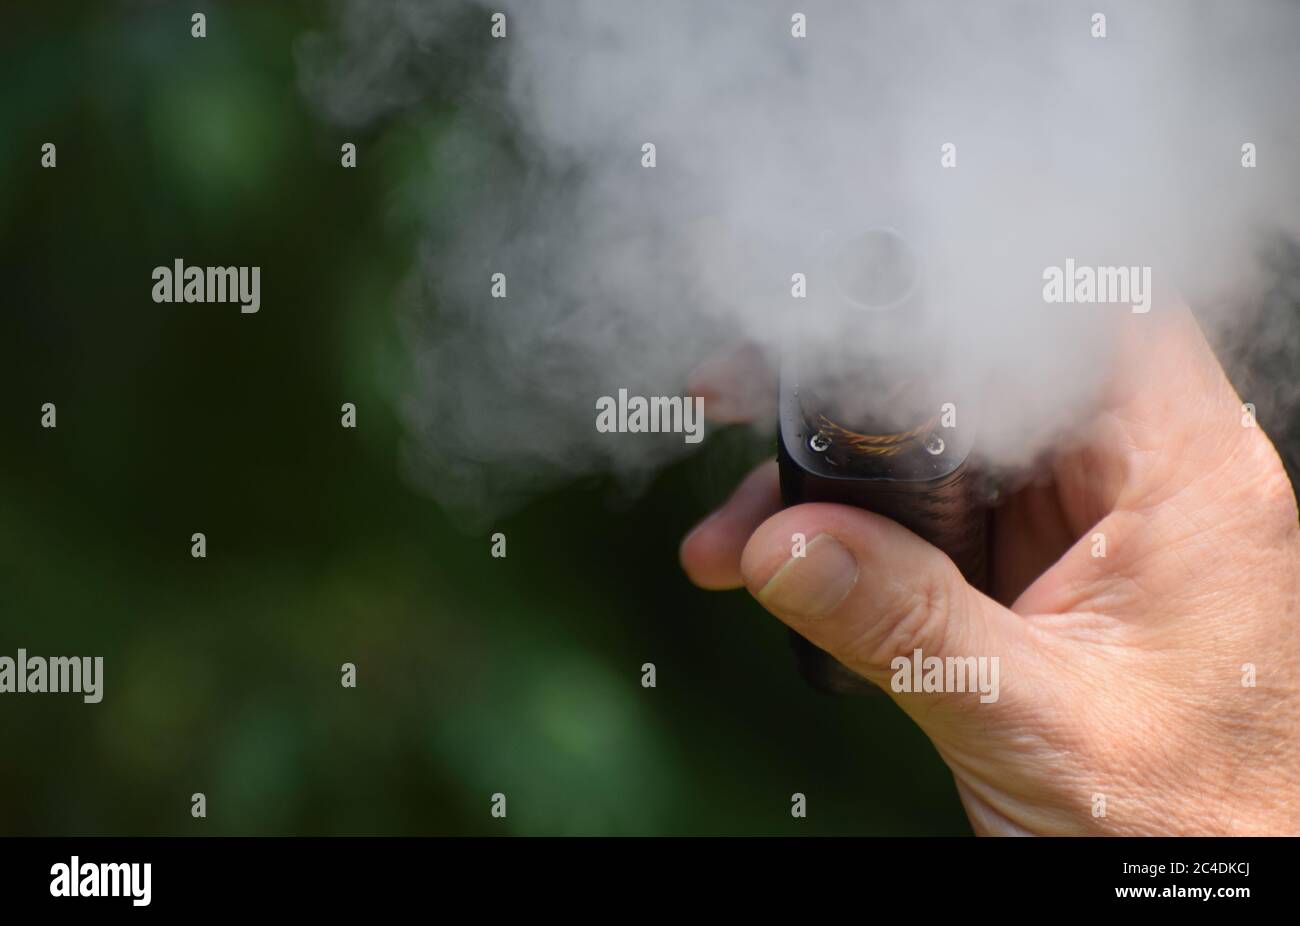 A close up of a man's hand holding an e-cigarette / vaping mod as he vapes creating lots of vape mist Stock Photo